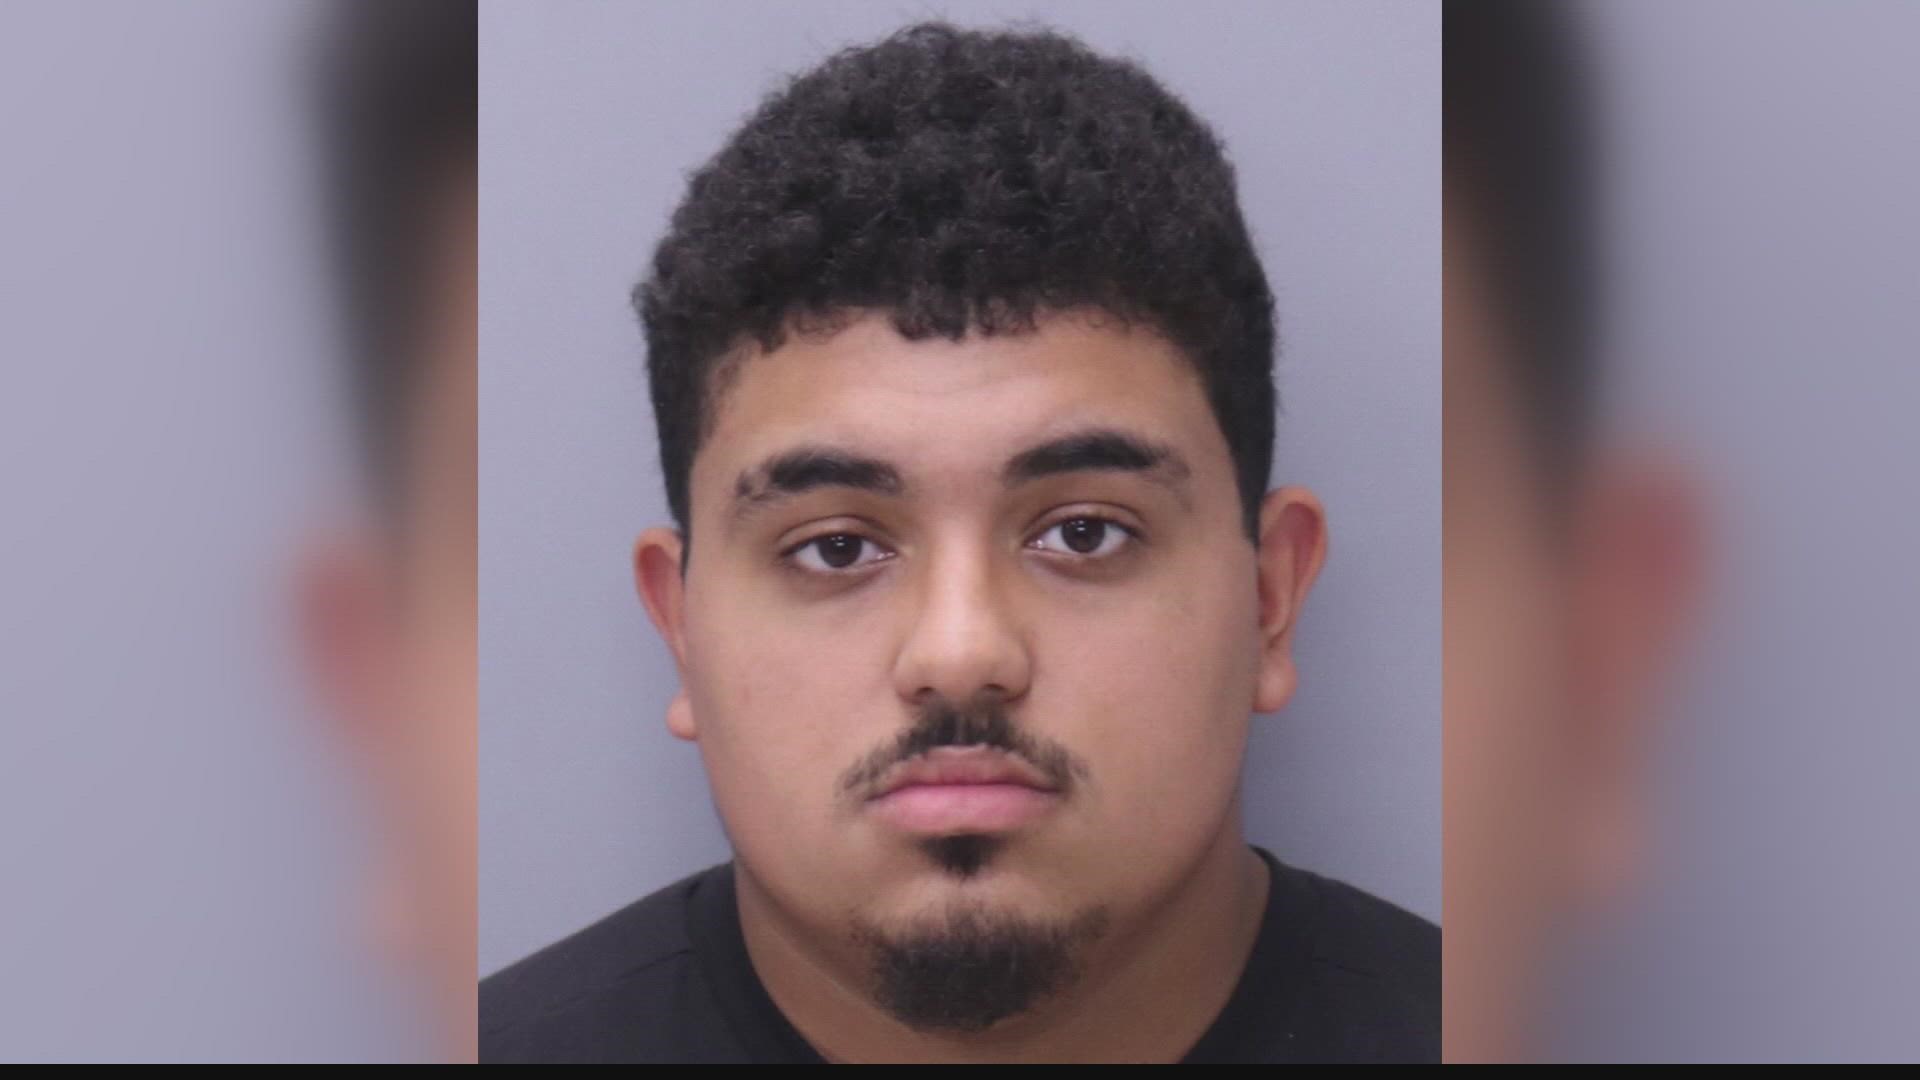 Parents of students at the private St. Johns County preschool say the children were molested by former assistant teacher Anthony Guadalupe and the school did nothing